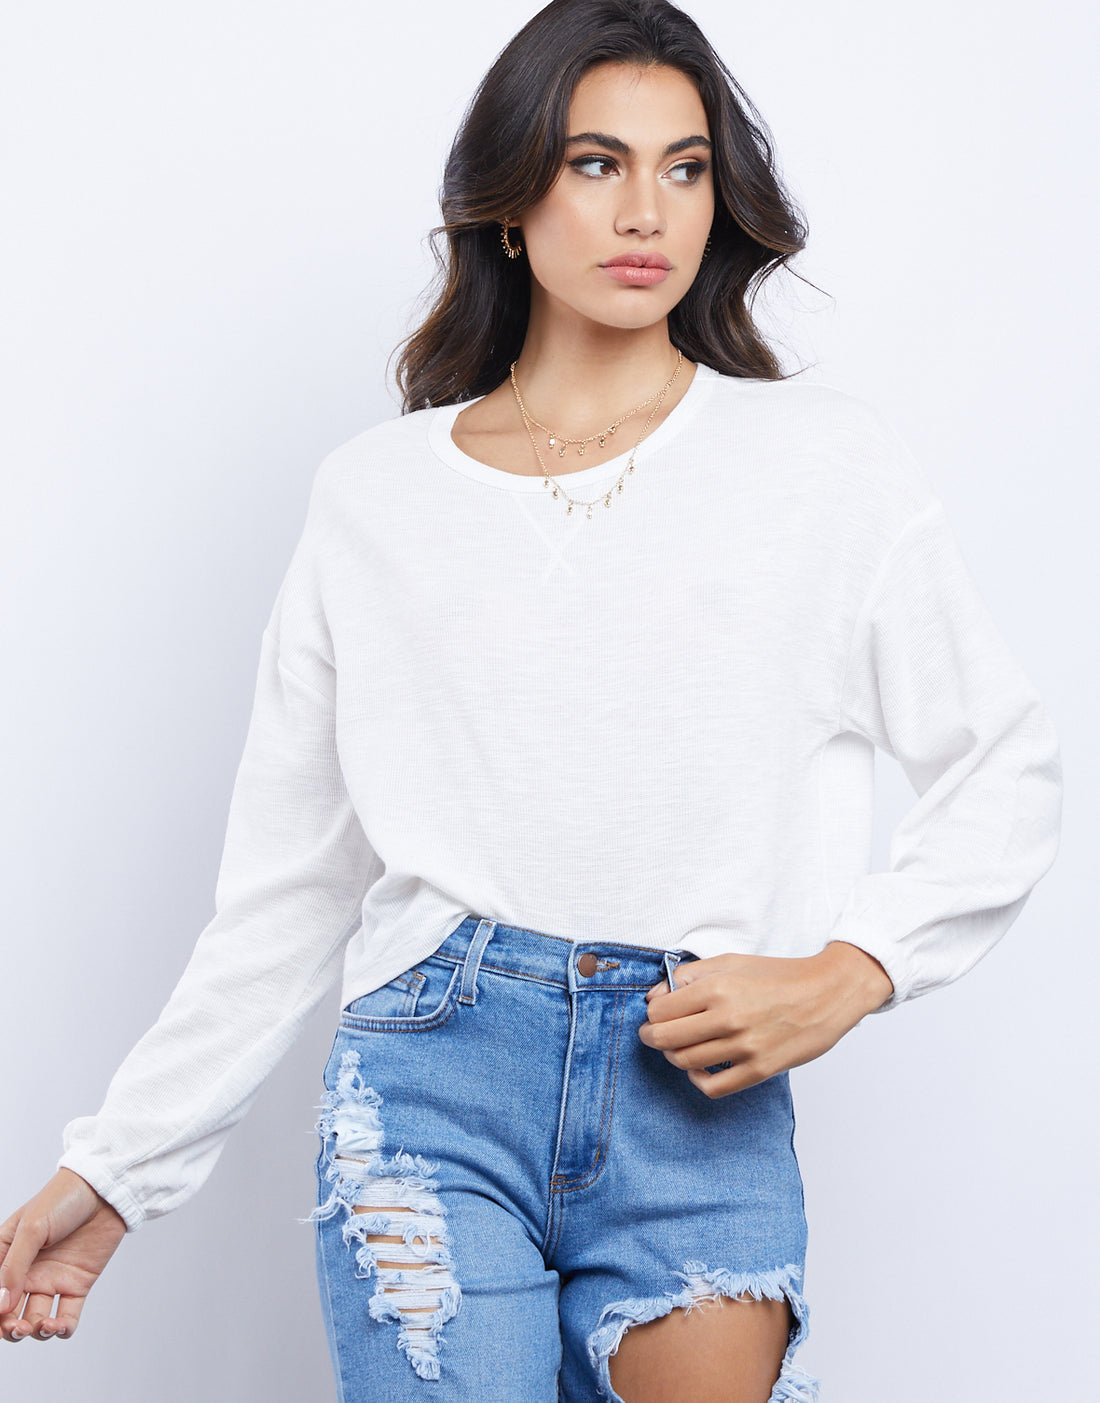 The Cozy Girl Thermal Top Tops -2020AVE